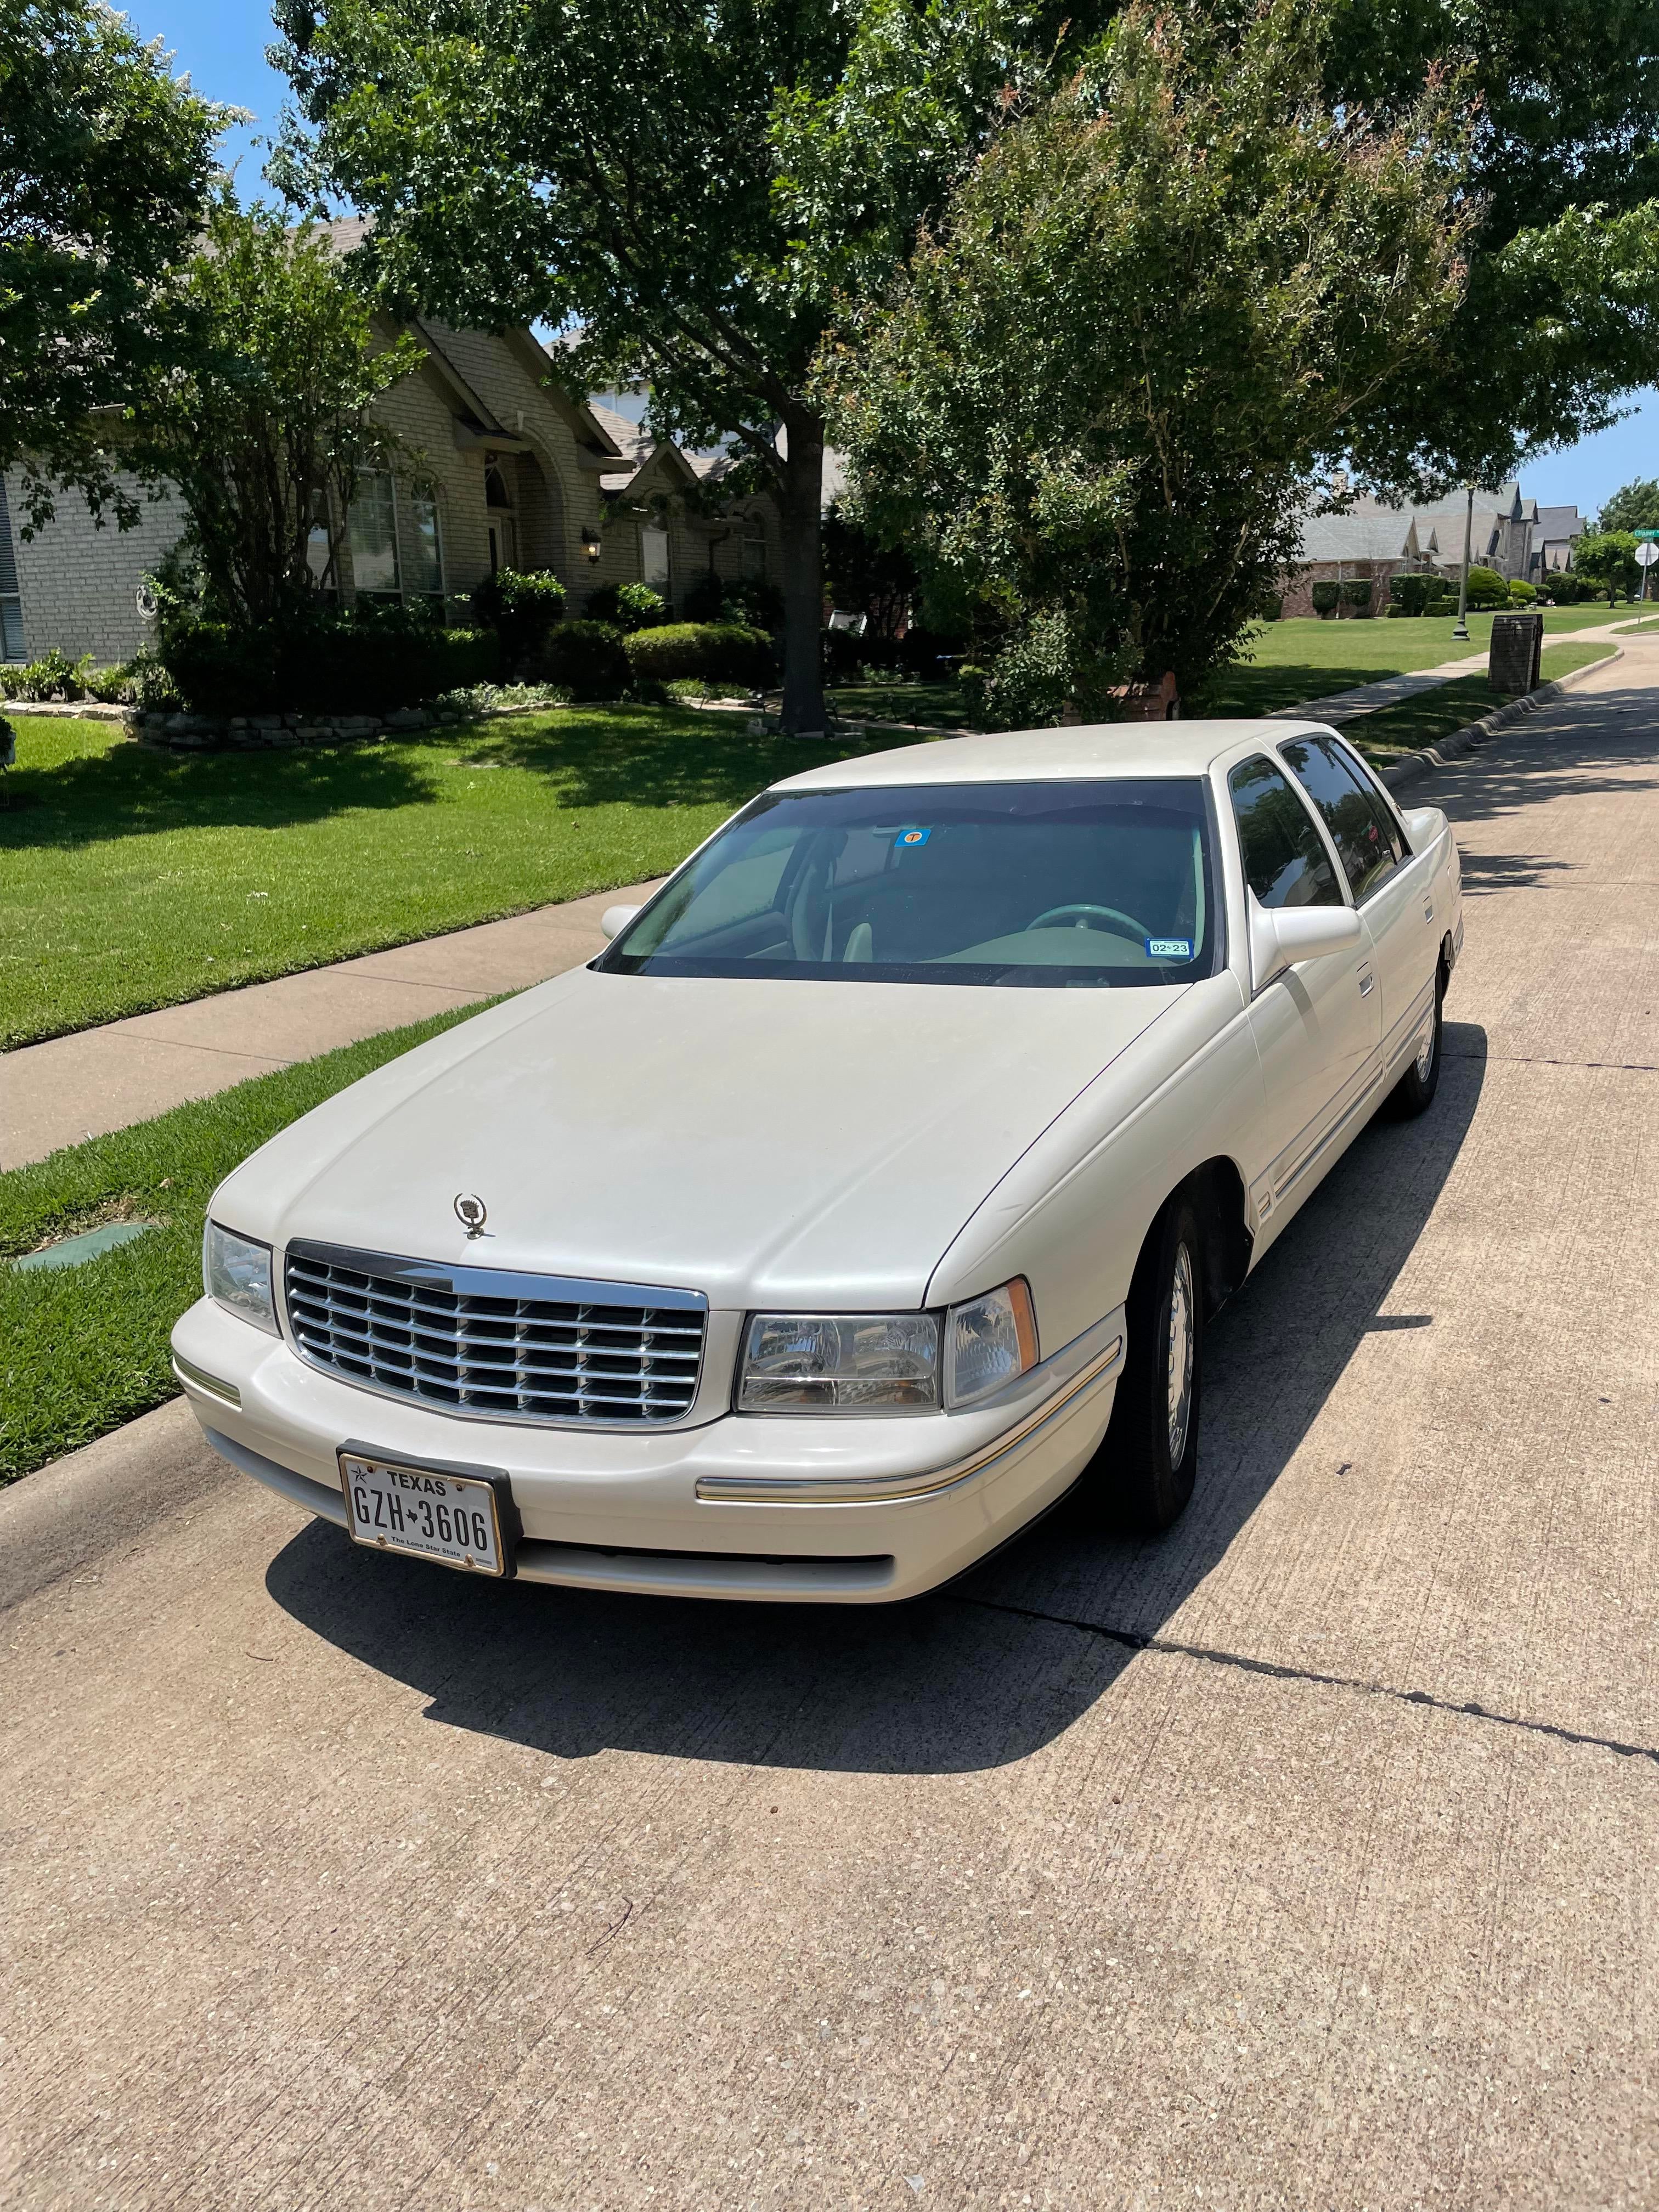 1998 Cadillac DeVille DeElegance! Why can't this car sell? Just put $7000  in repairs the last couple of years and runs great. No one will over over  $500 for it. 154,000 miles.